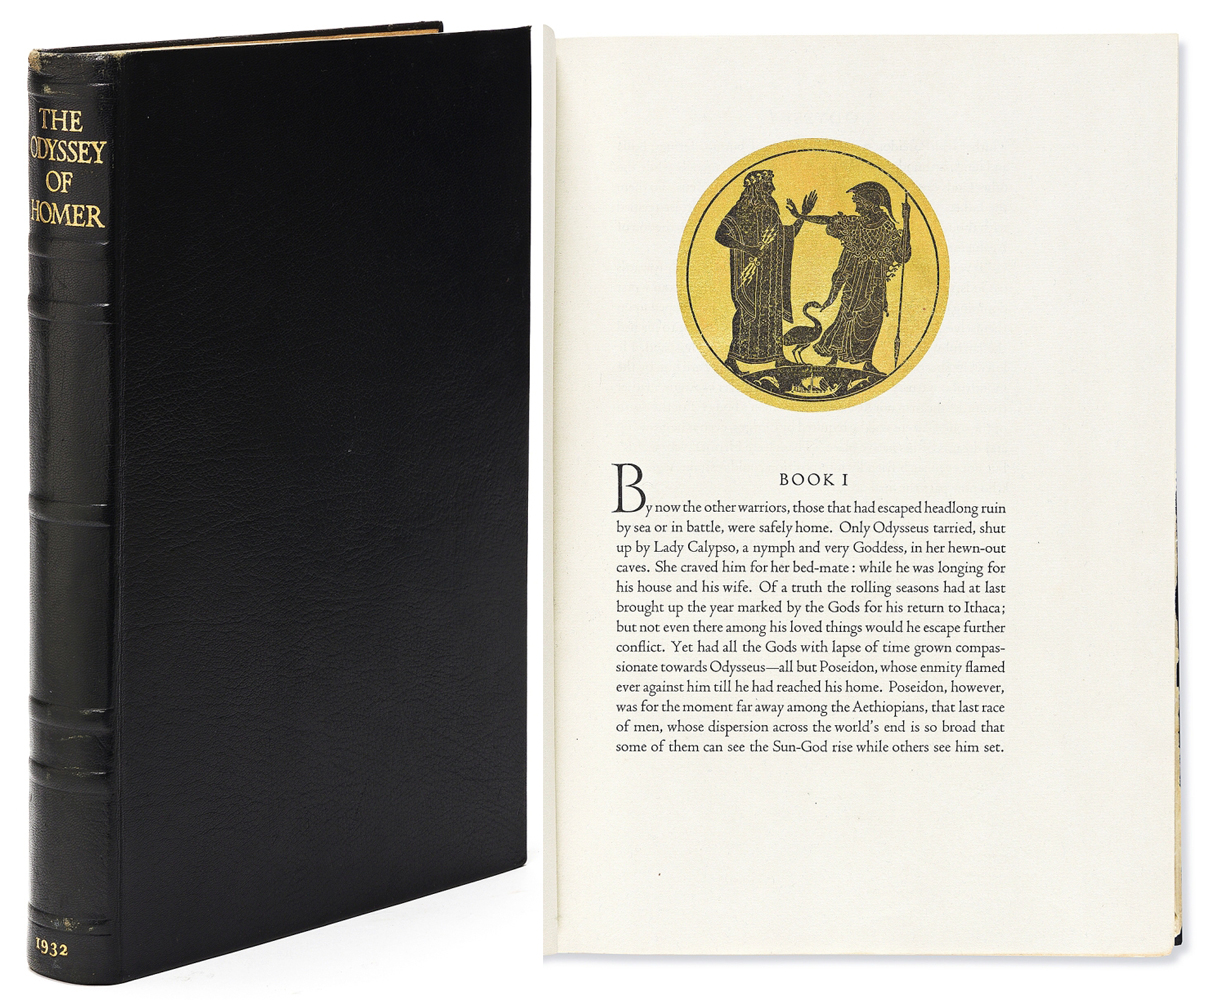 Homer, The Odyssey, with 26 black-on-gold roundels by Bruce Rogers in the style of ancient Greek vase paintings, one of 530 copies of the first T.E. Lawrence editions, with a handwritten letter by Lawrence, London, 1932, fetched $7,500.